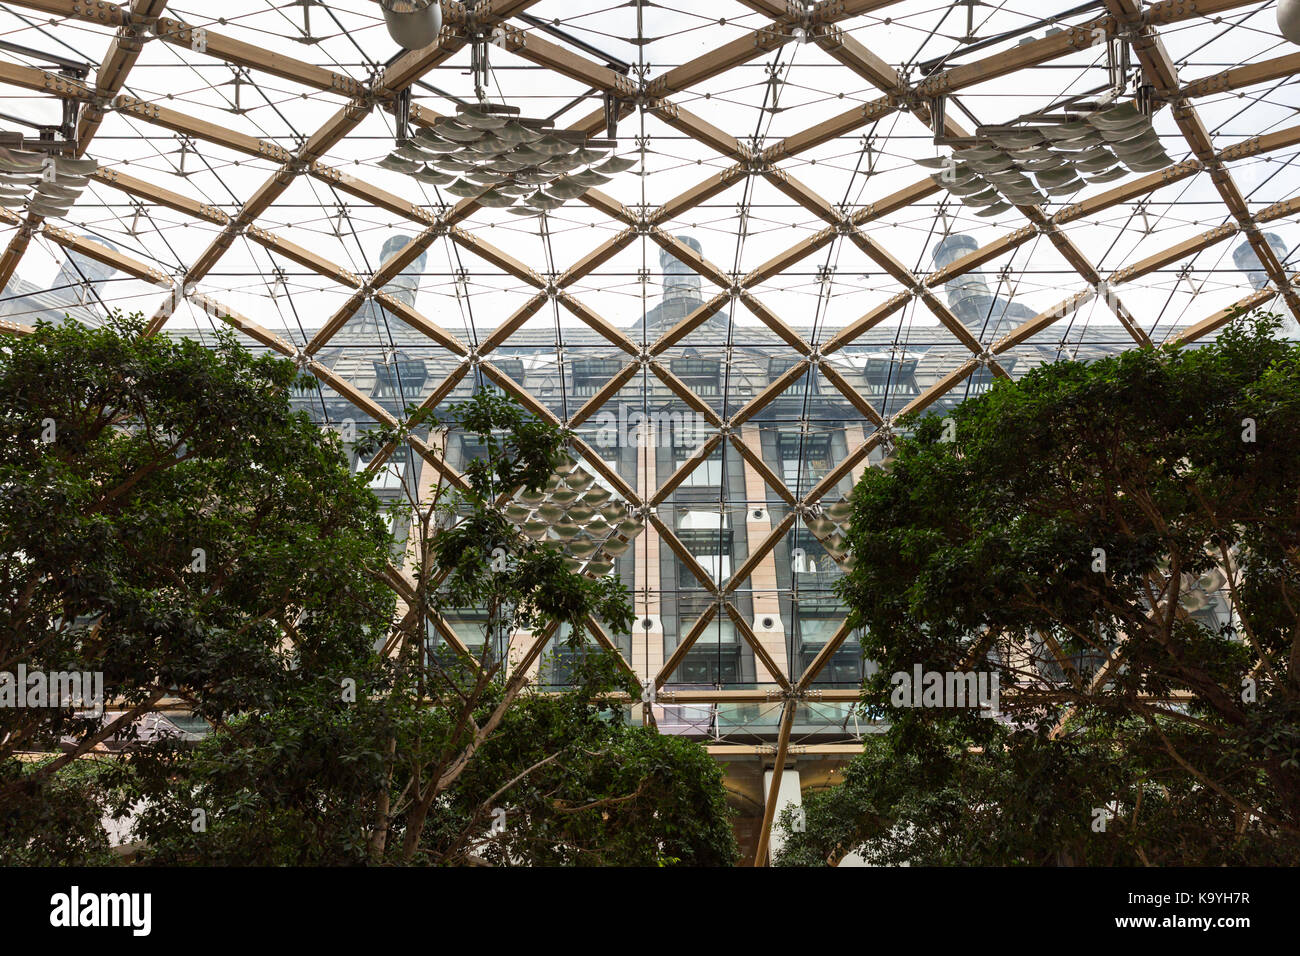 The glass roof structure and atrium at Portcullis House, Westminster, London England UK Stock Photo